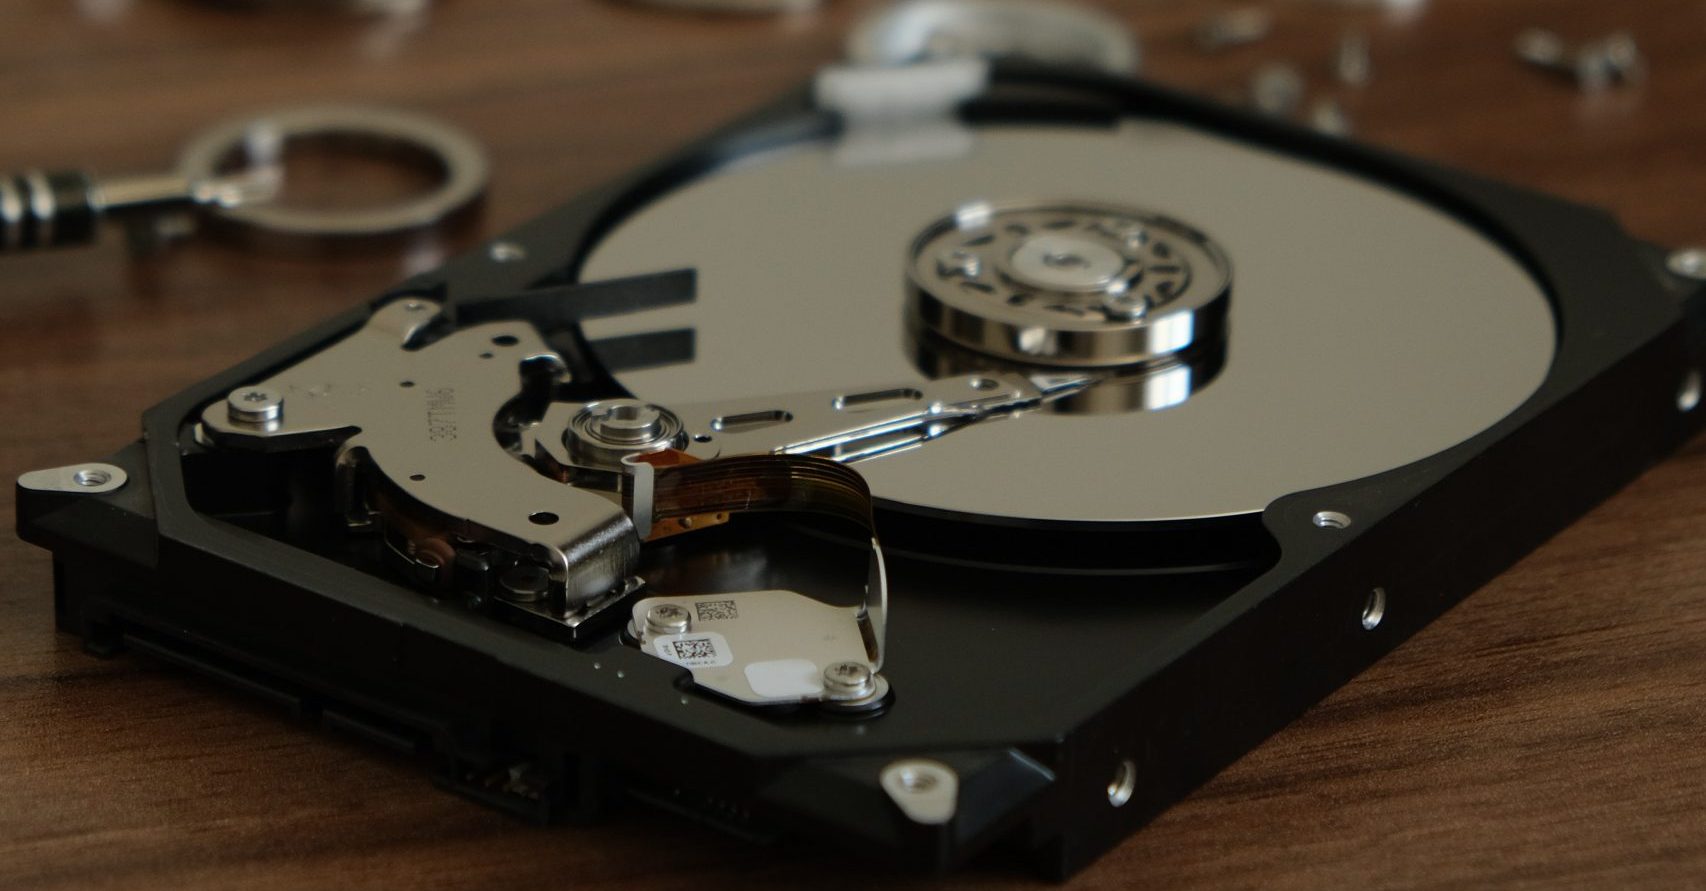 Seagate Multi Actuator Technology: Data Recovery